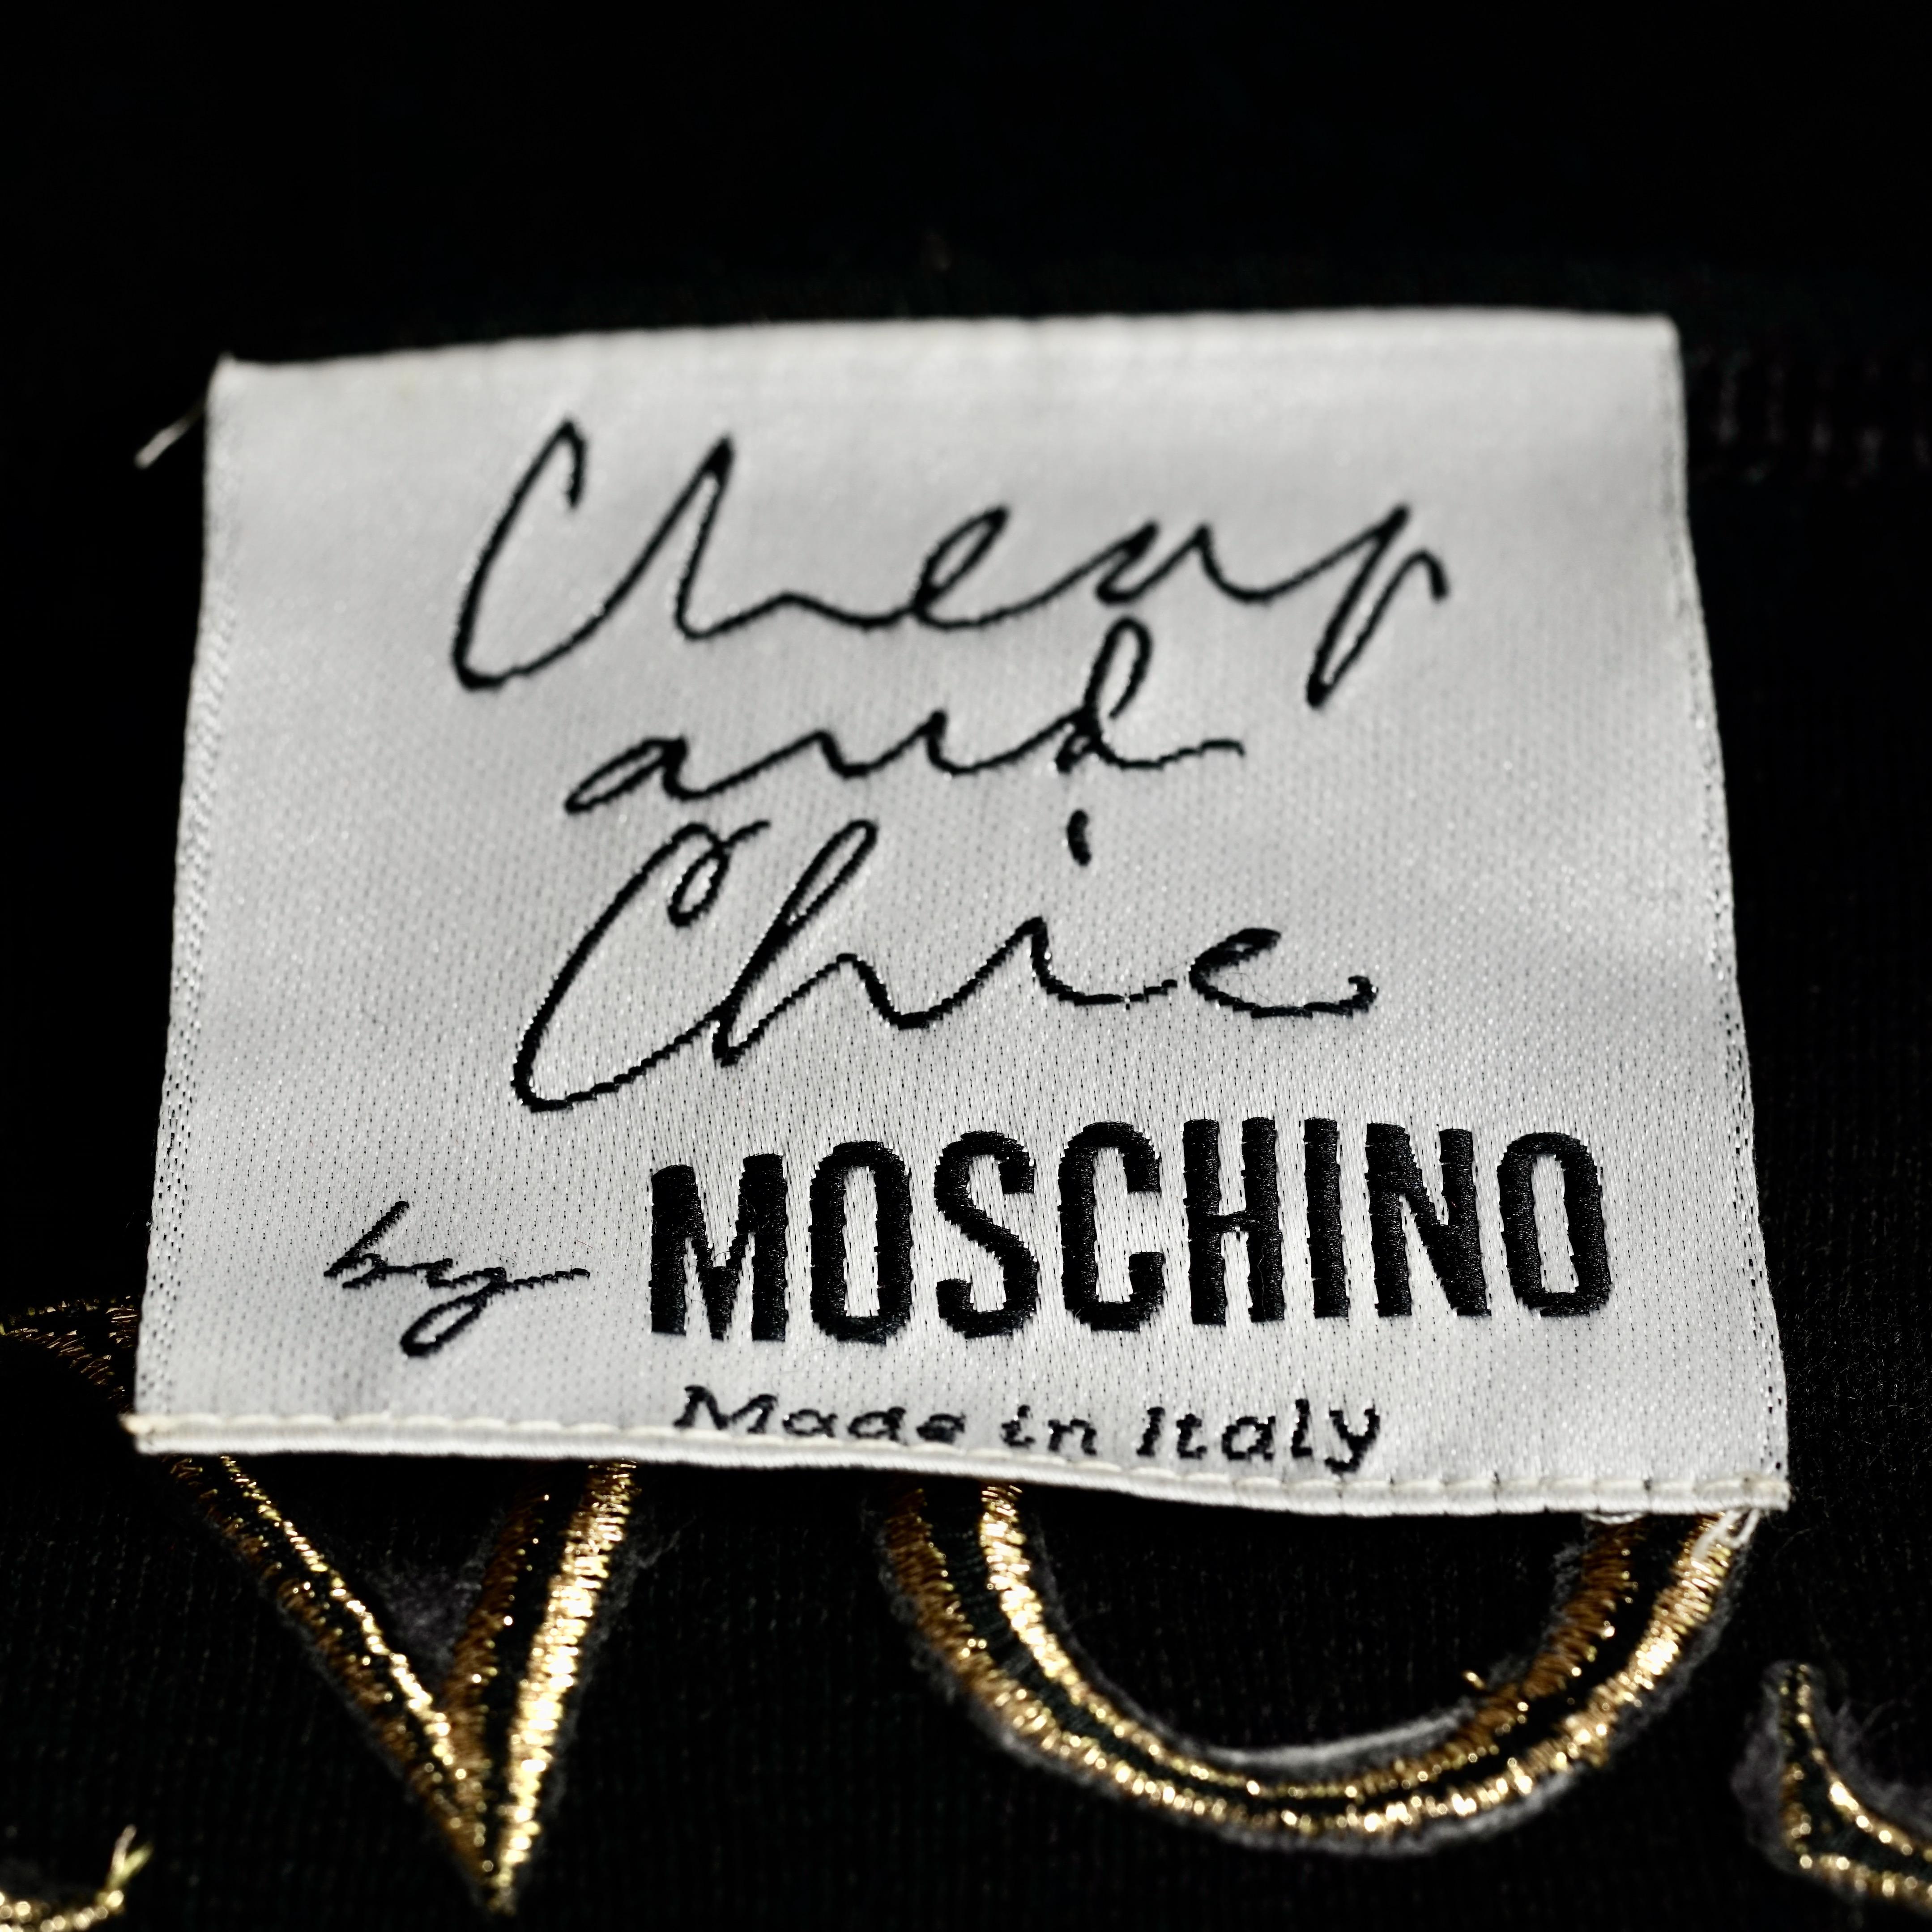 Vintage MOSCHINO Cheap and Chic 